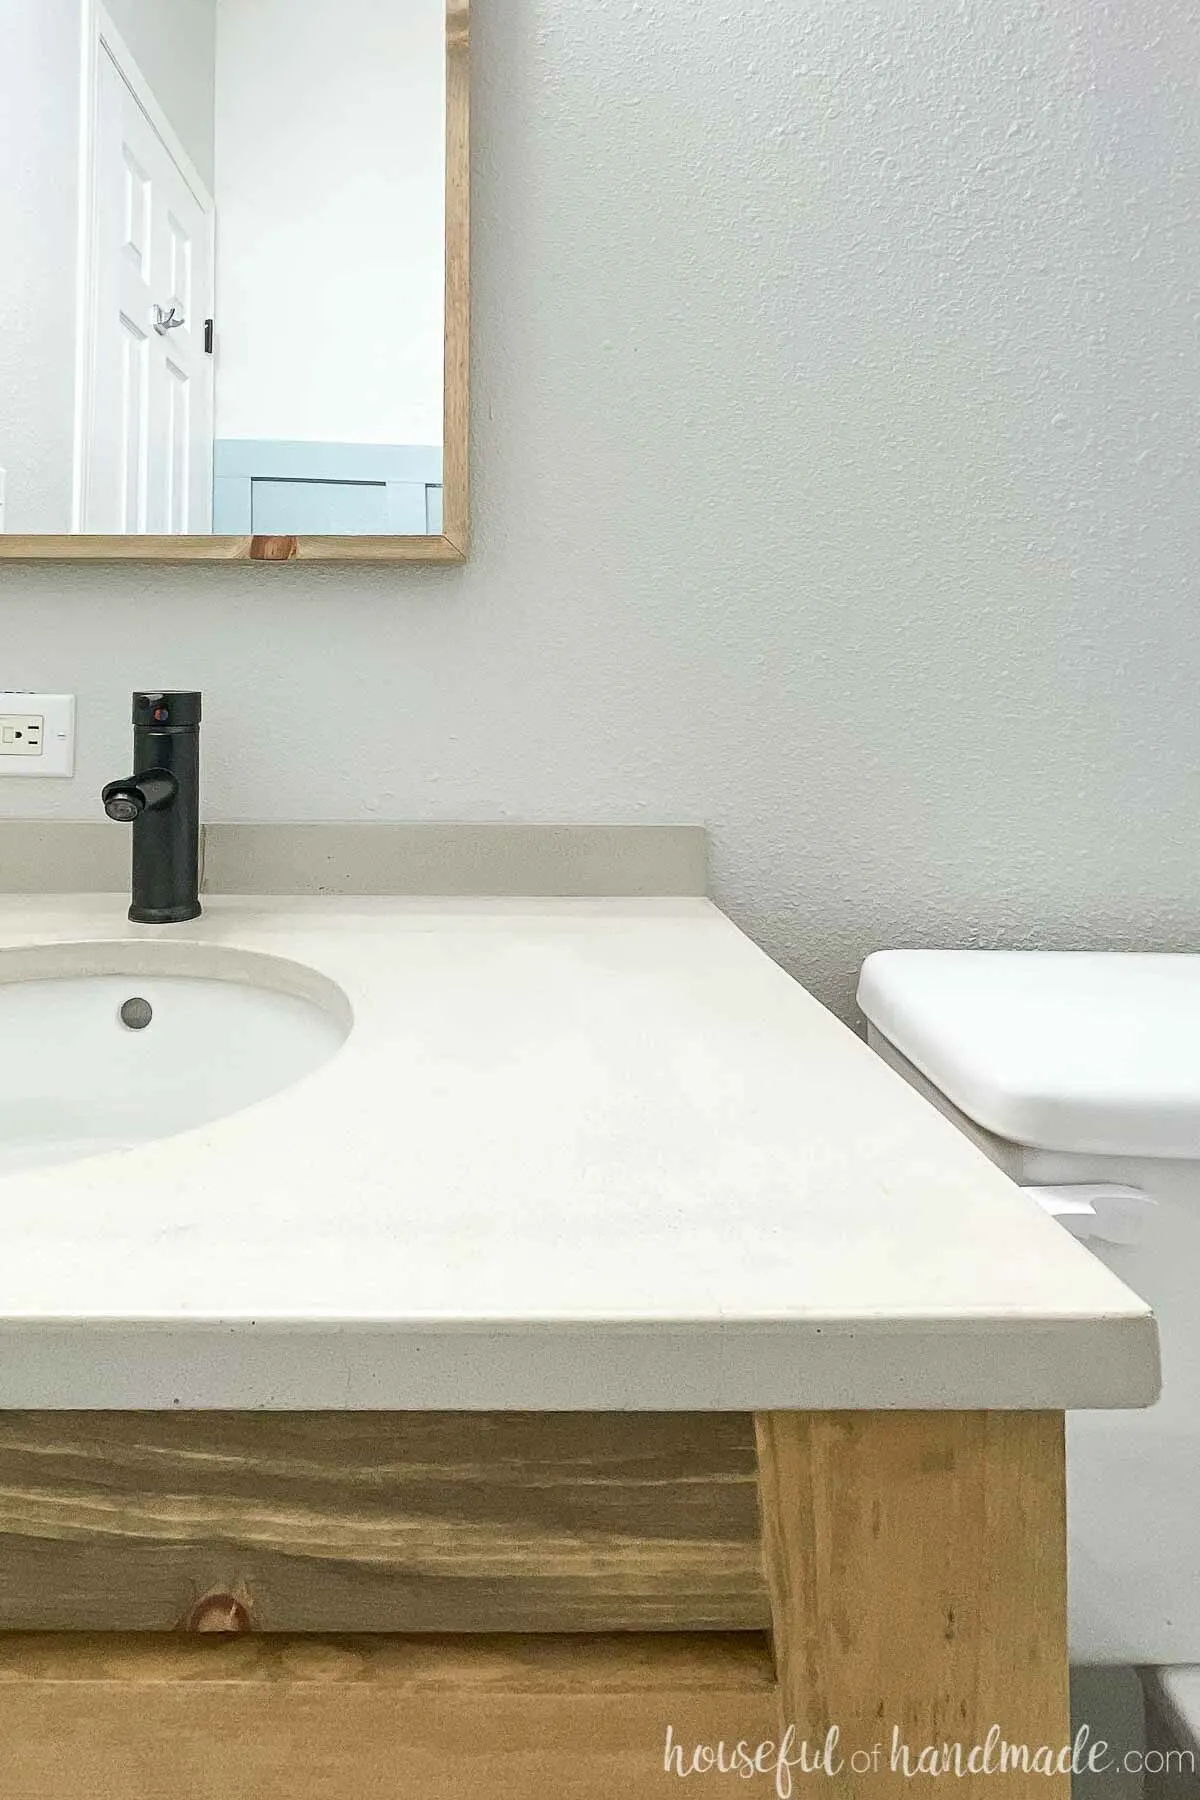 Half of the DIY concrete countertop installed on an open vanity with a black faucet and white undermount sink.